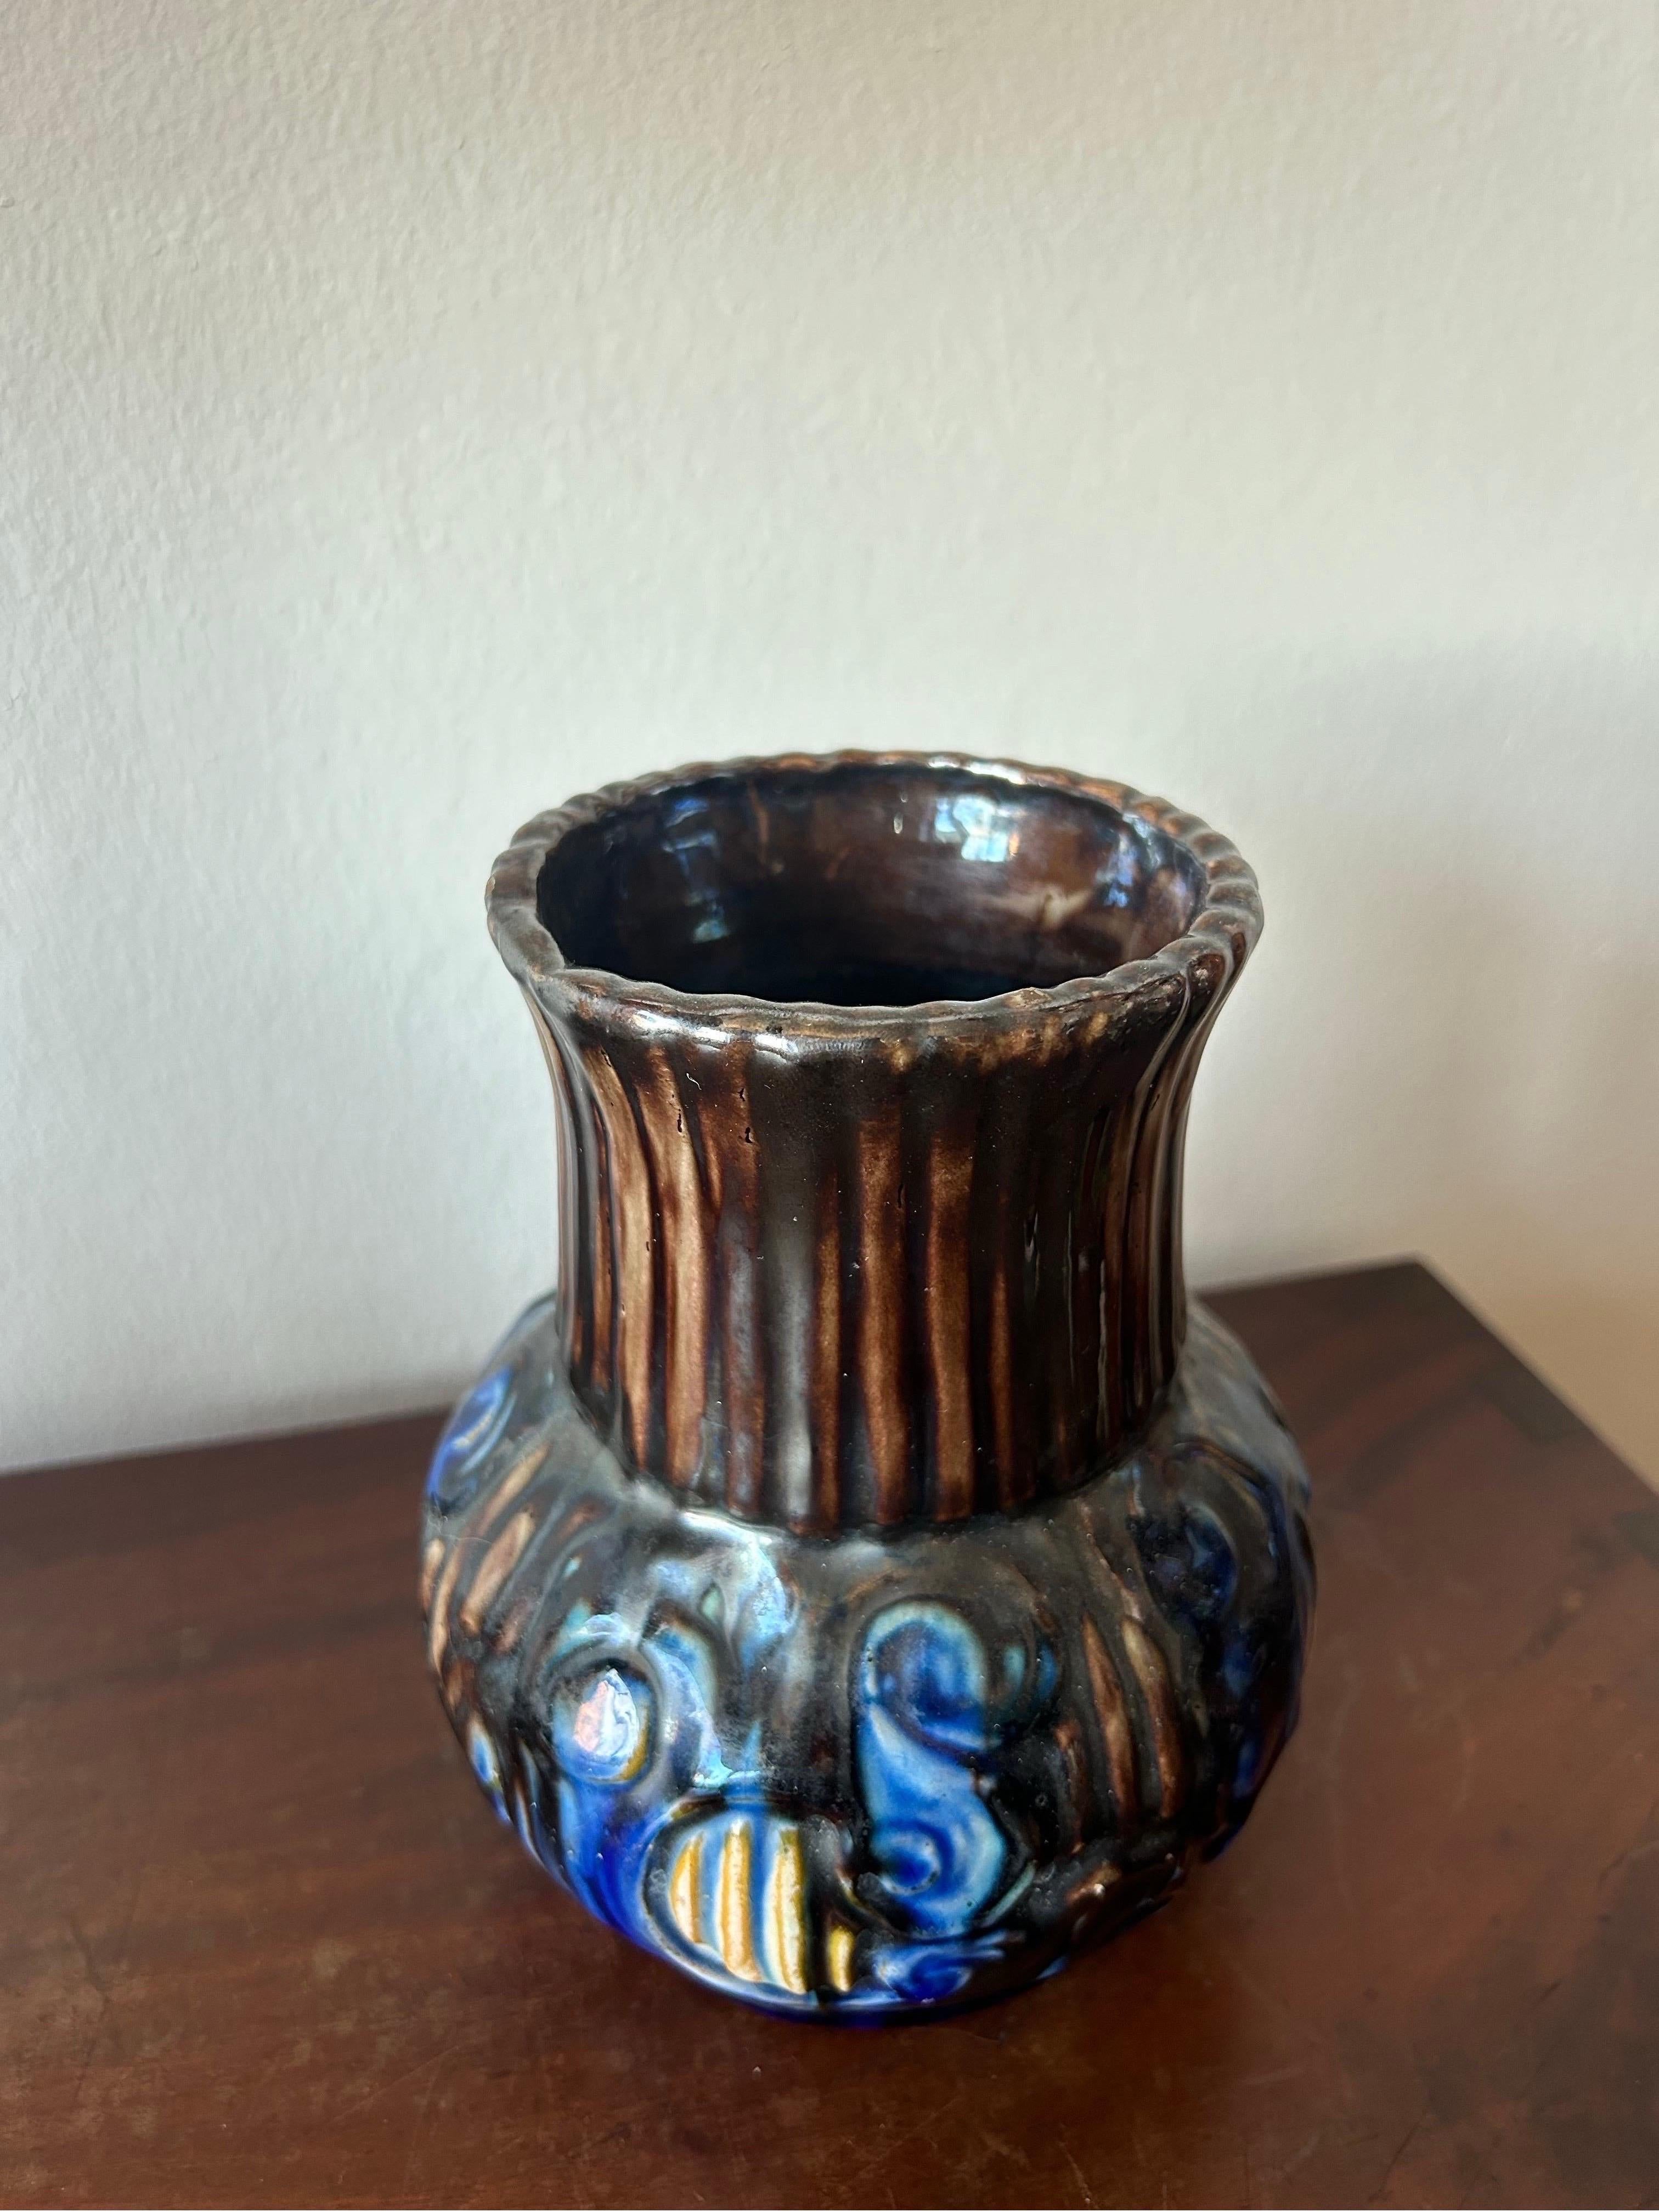 Roskilde Lervare Fabrik vase manufactured by a well known but very undocumented factory called Roskilde Lervare Fabrik in Denmark in the early 1900’s.
This specific vase is marked with the number 66.
The vase has a very traditional Danish Arts and